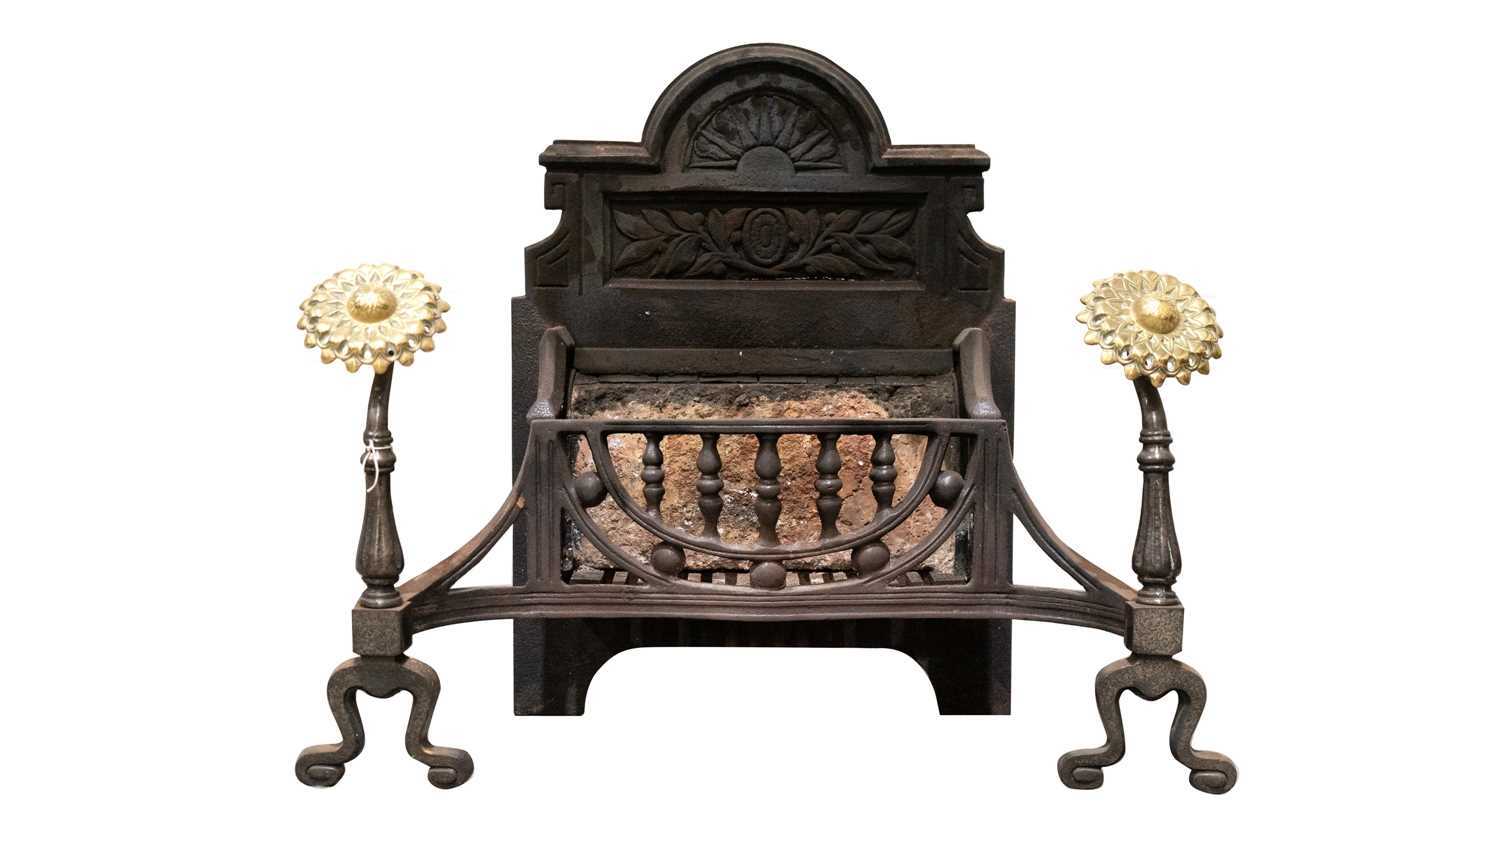 A cast iron firegrate incorporating a pair of fire dogs